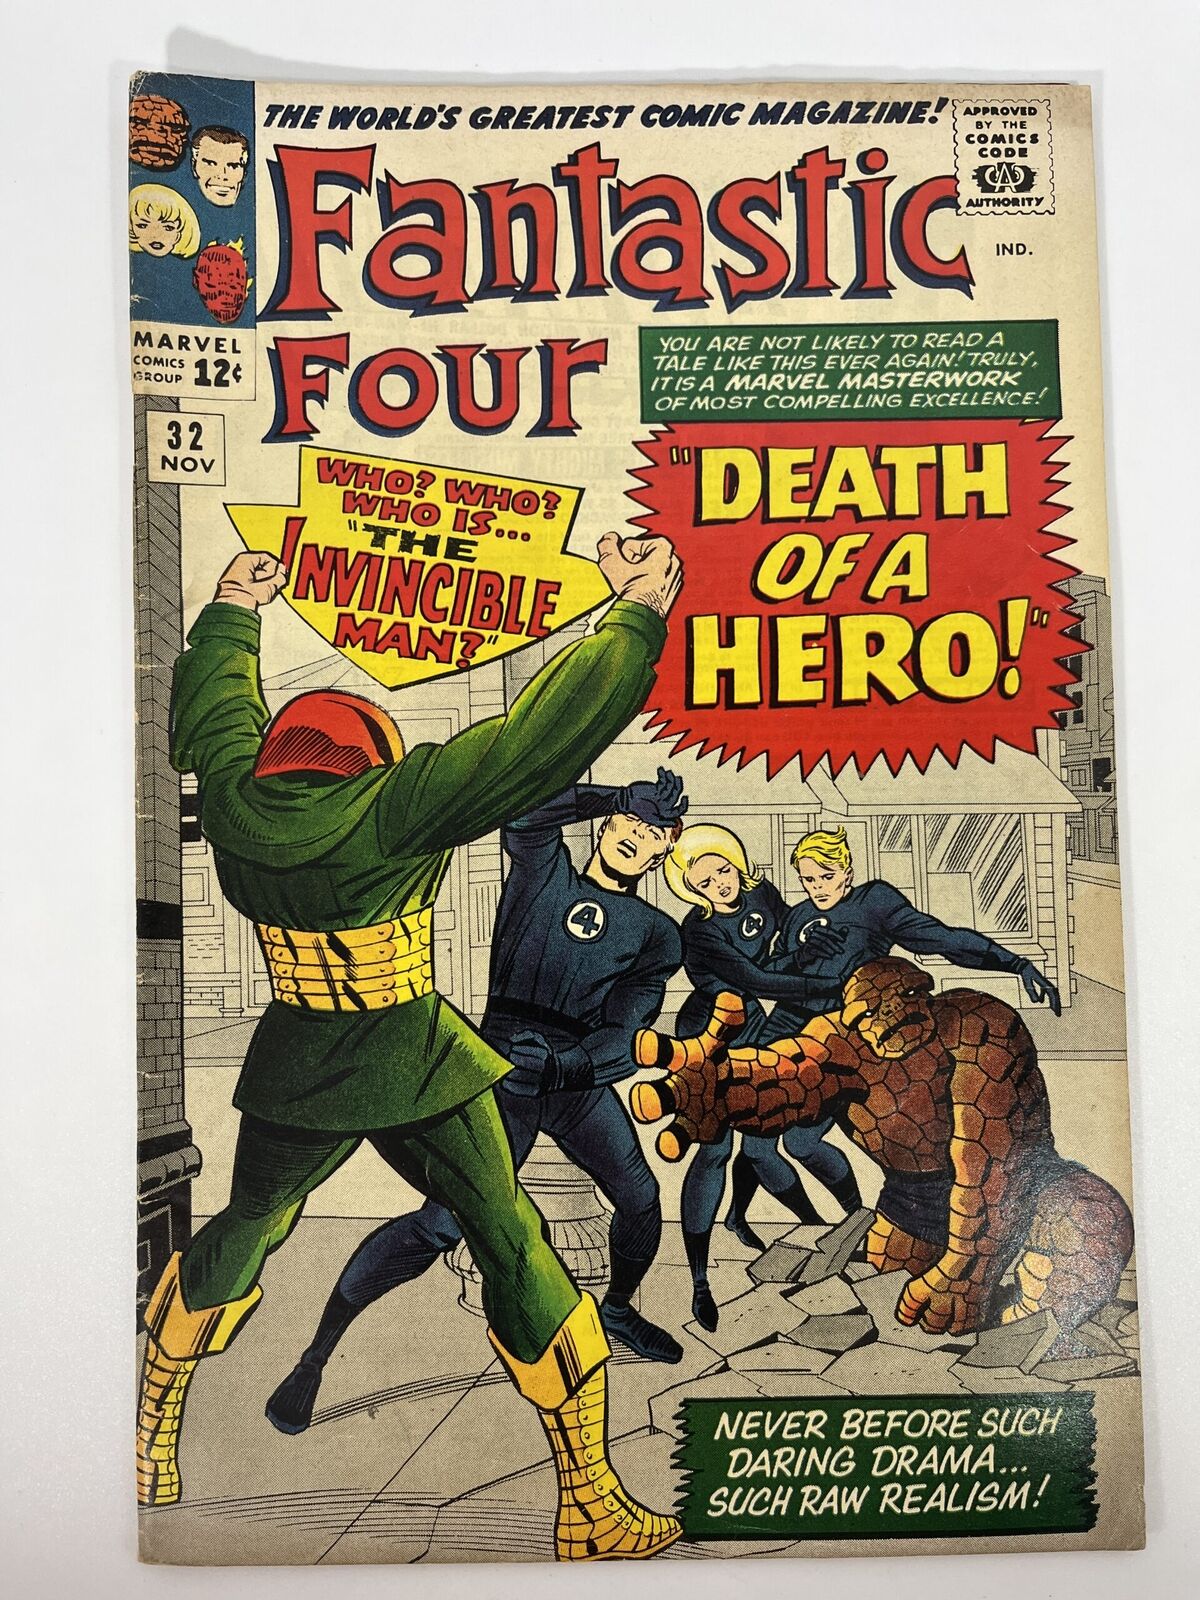 Fantastic Four #32 (1964) in 5.0 Very Good/Fine